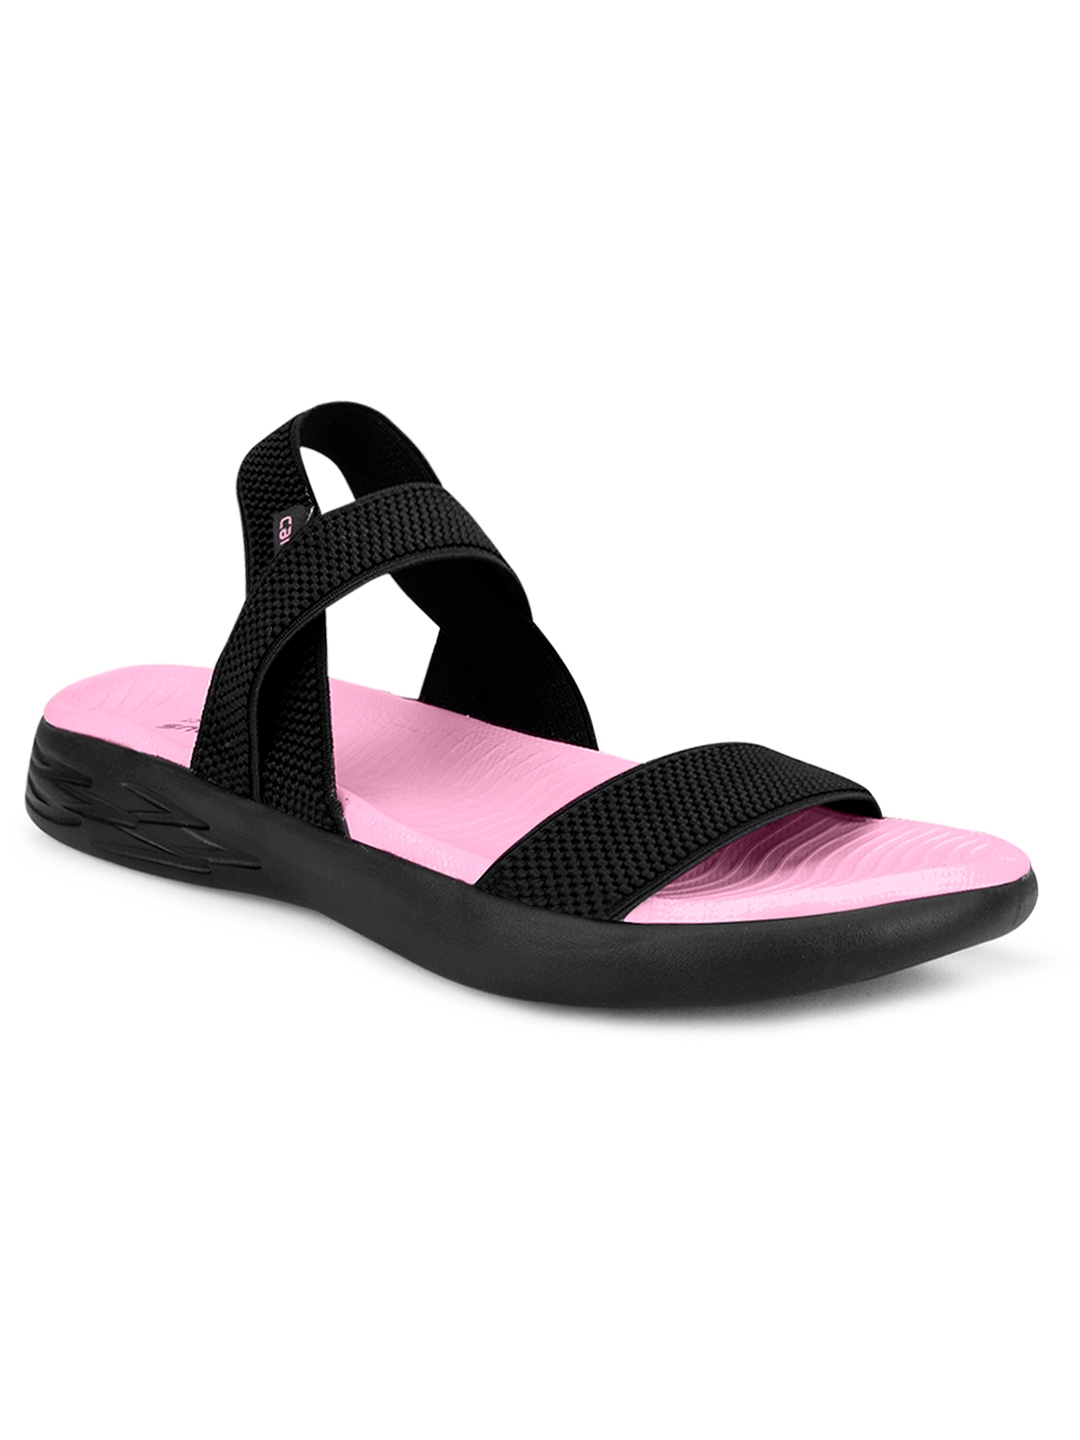 Campus Shoes | Black and Pink Floaters